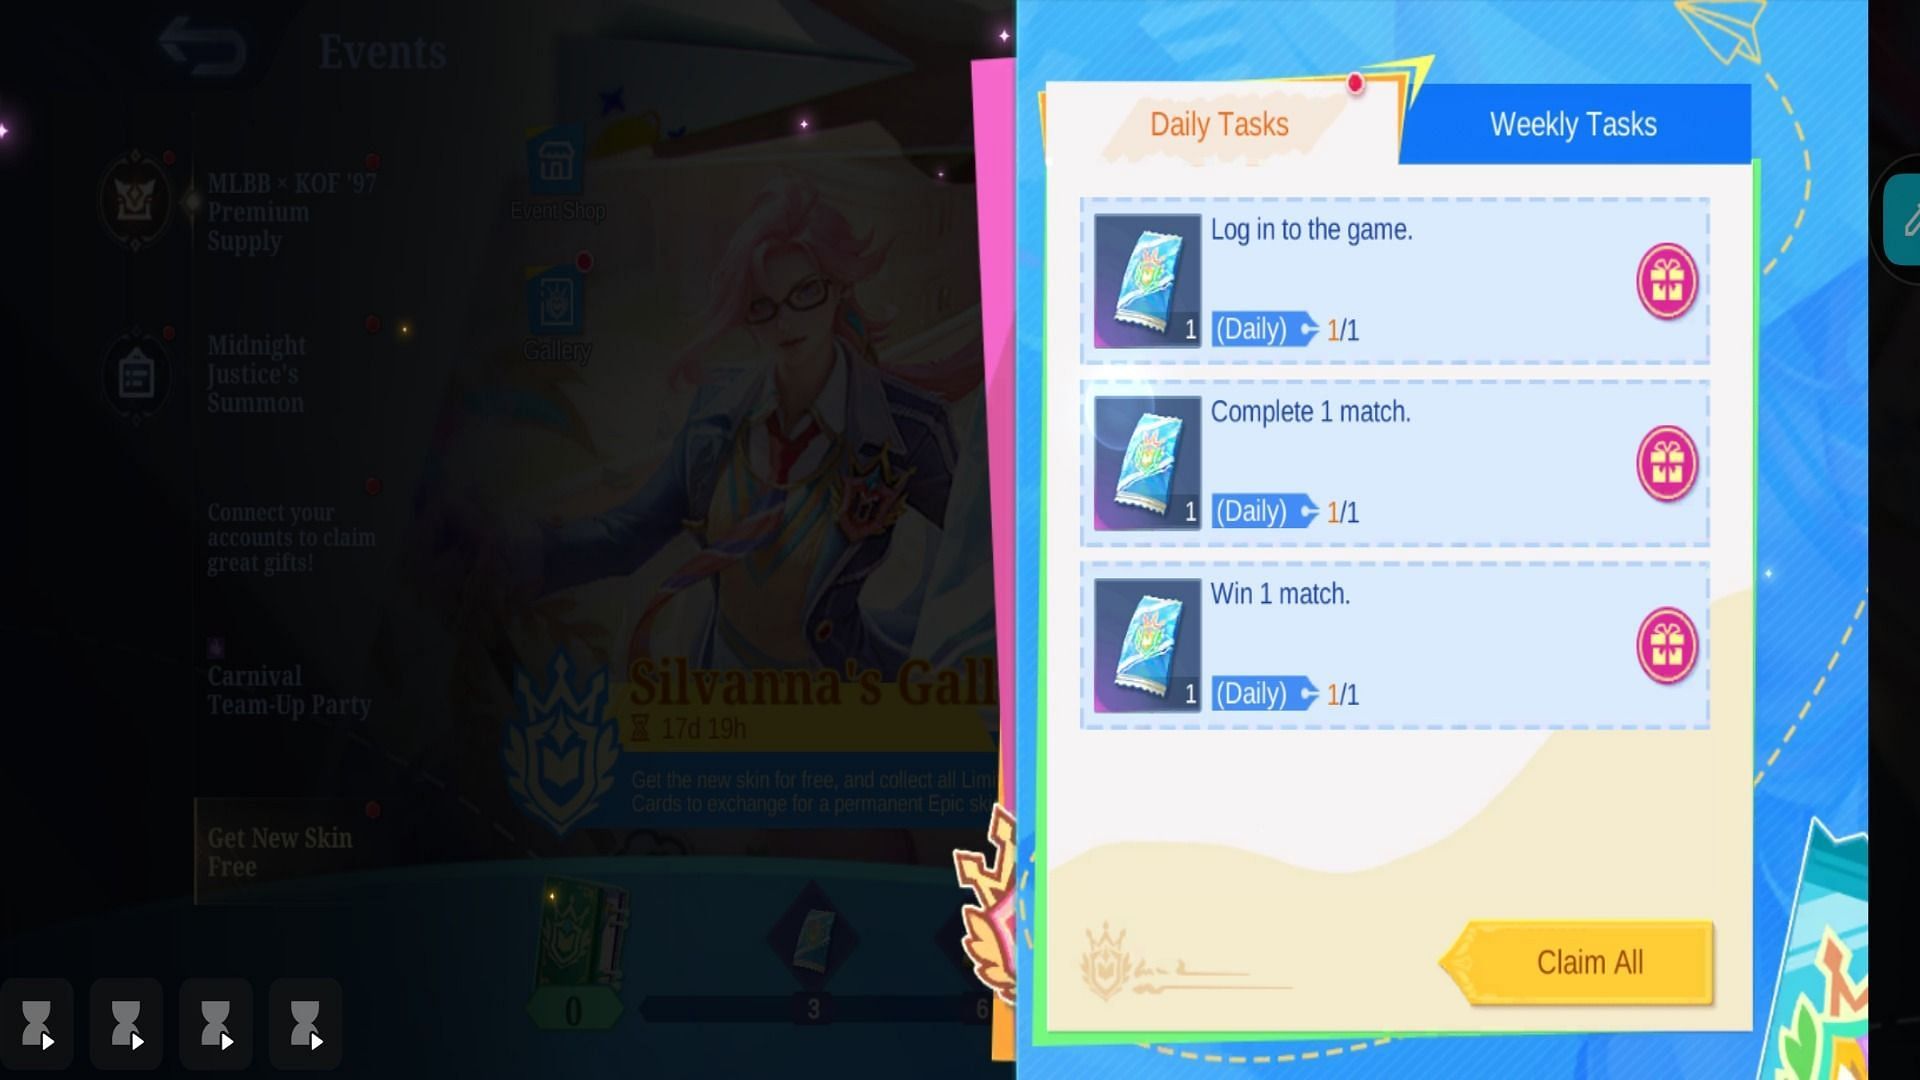 You can get more card packs by completing the daily tasks (Image via Moonton Games)